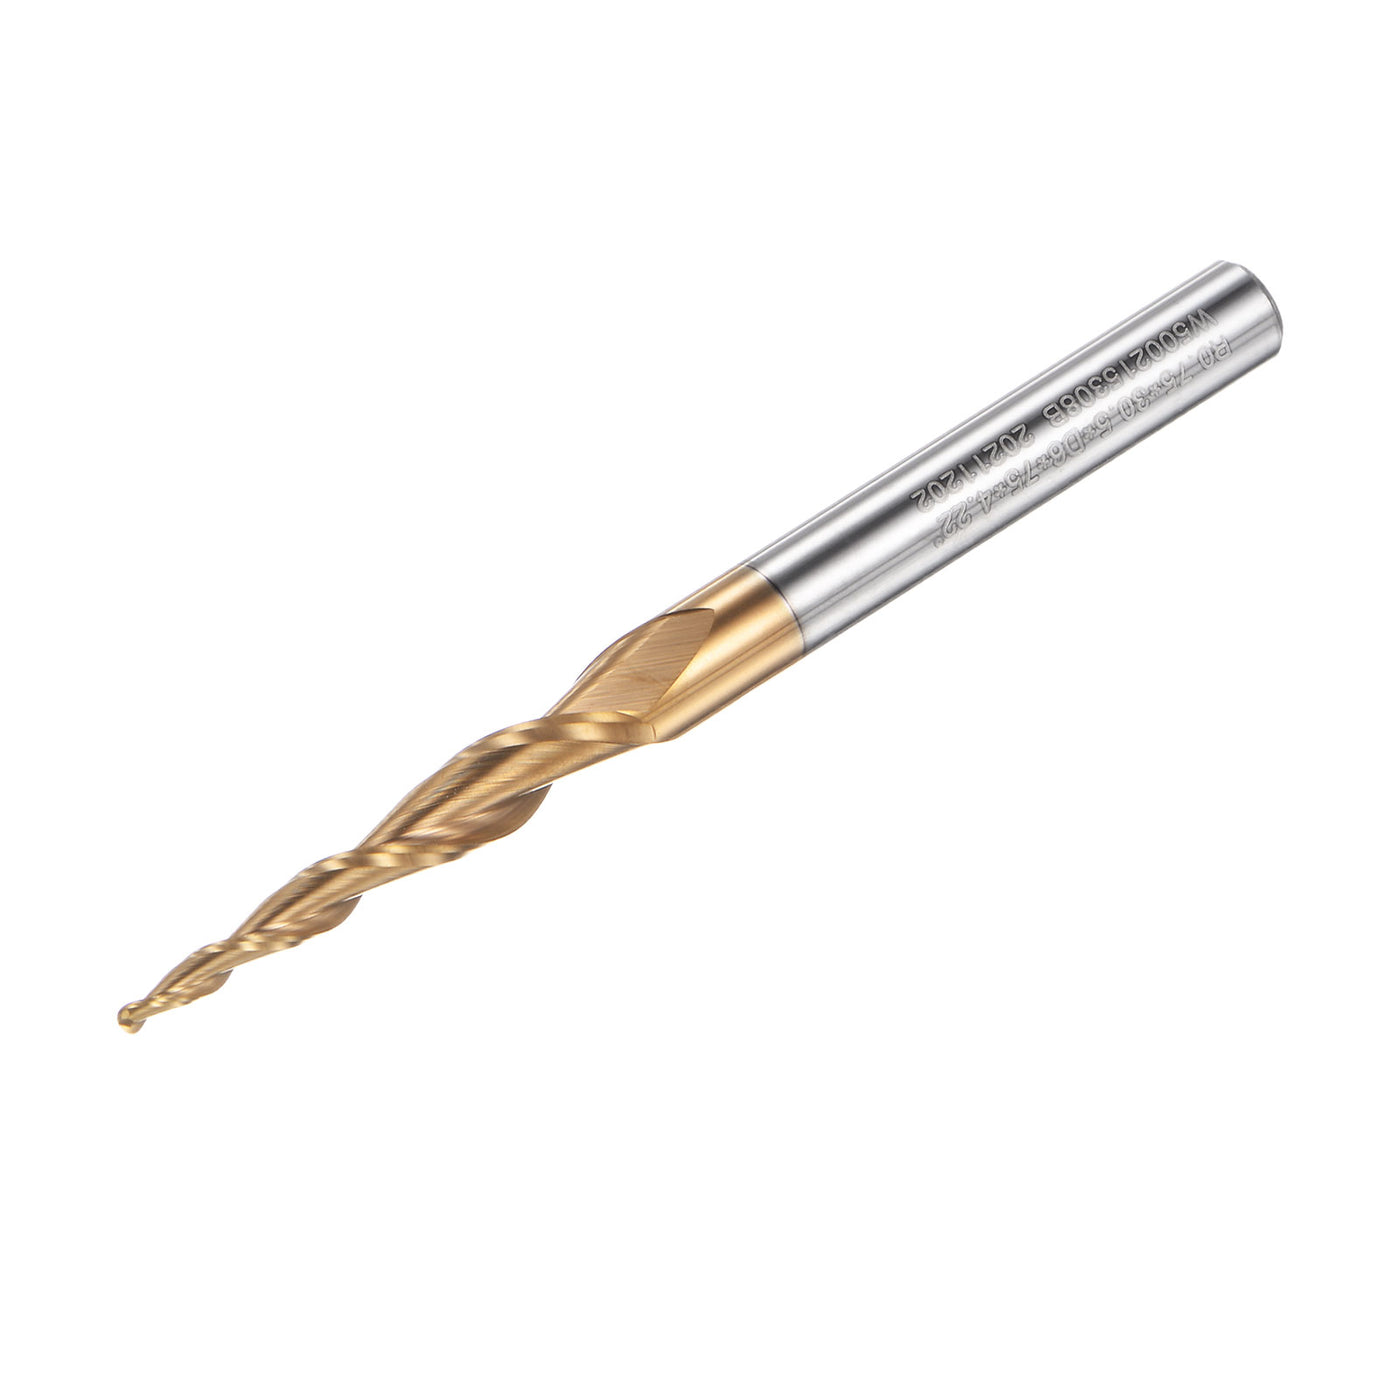 uxcell Uxcell 1.5mm x 6mm 8.44 Degree Angle TiSiN Coated Carbide Tapered Ball Nose End Mill